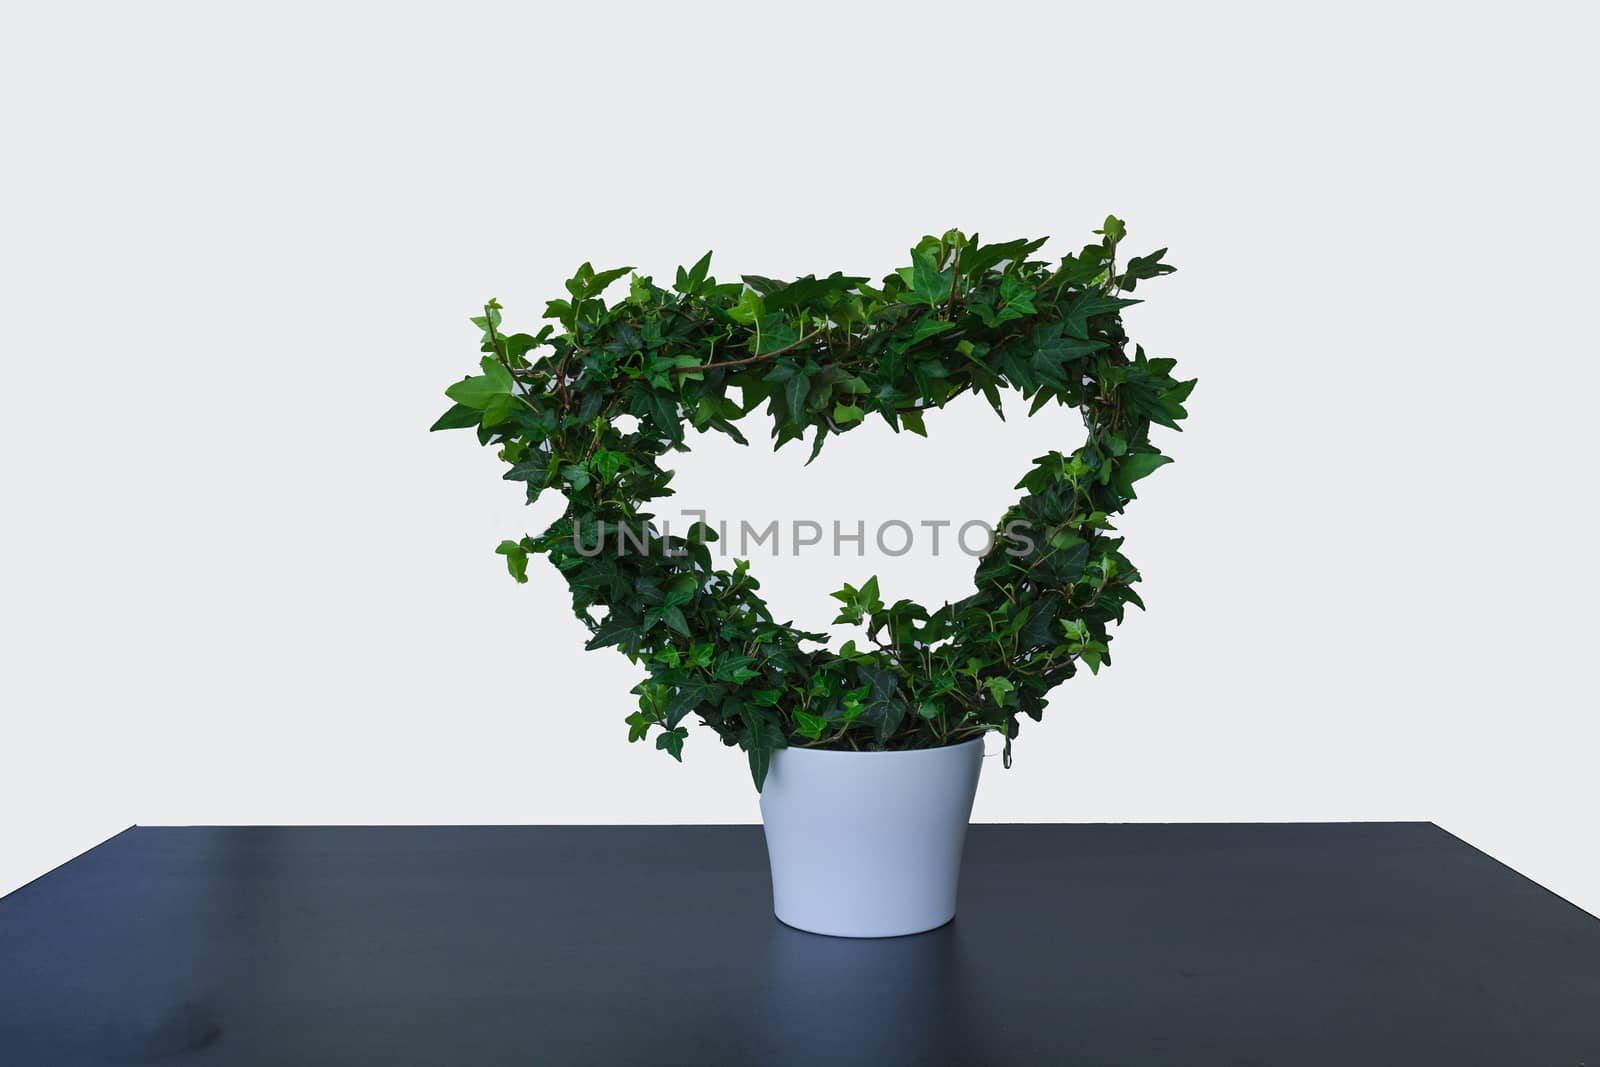 Green ivy rivers in heart-frome in front of white background in a planter